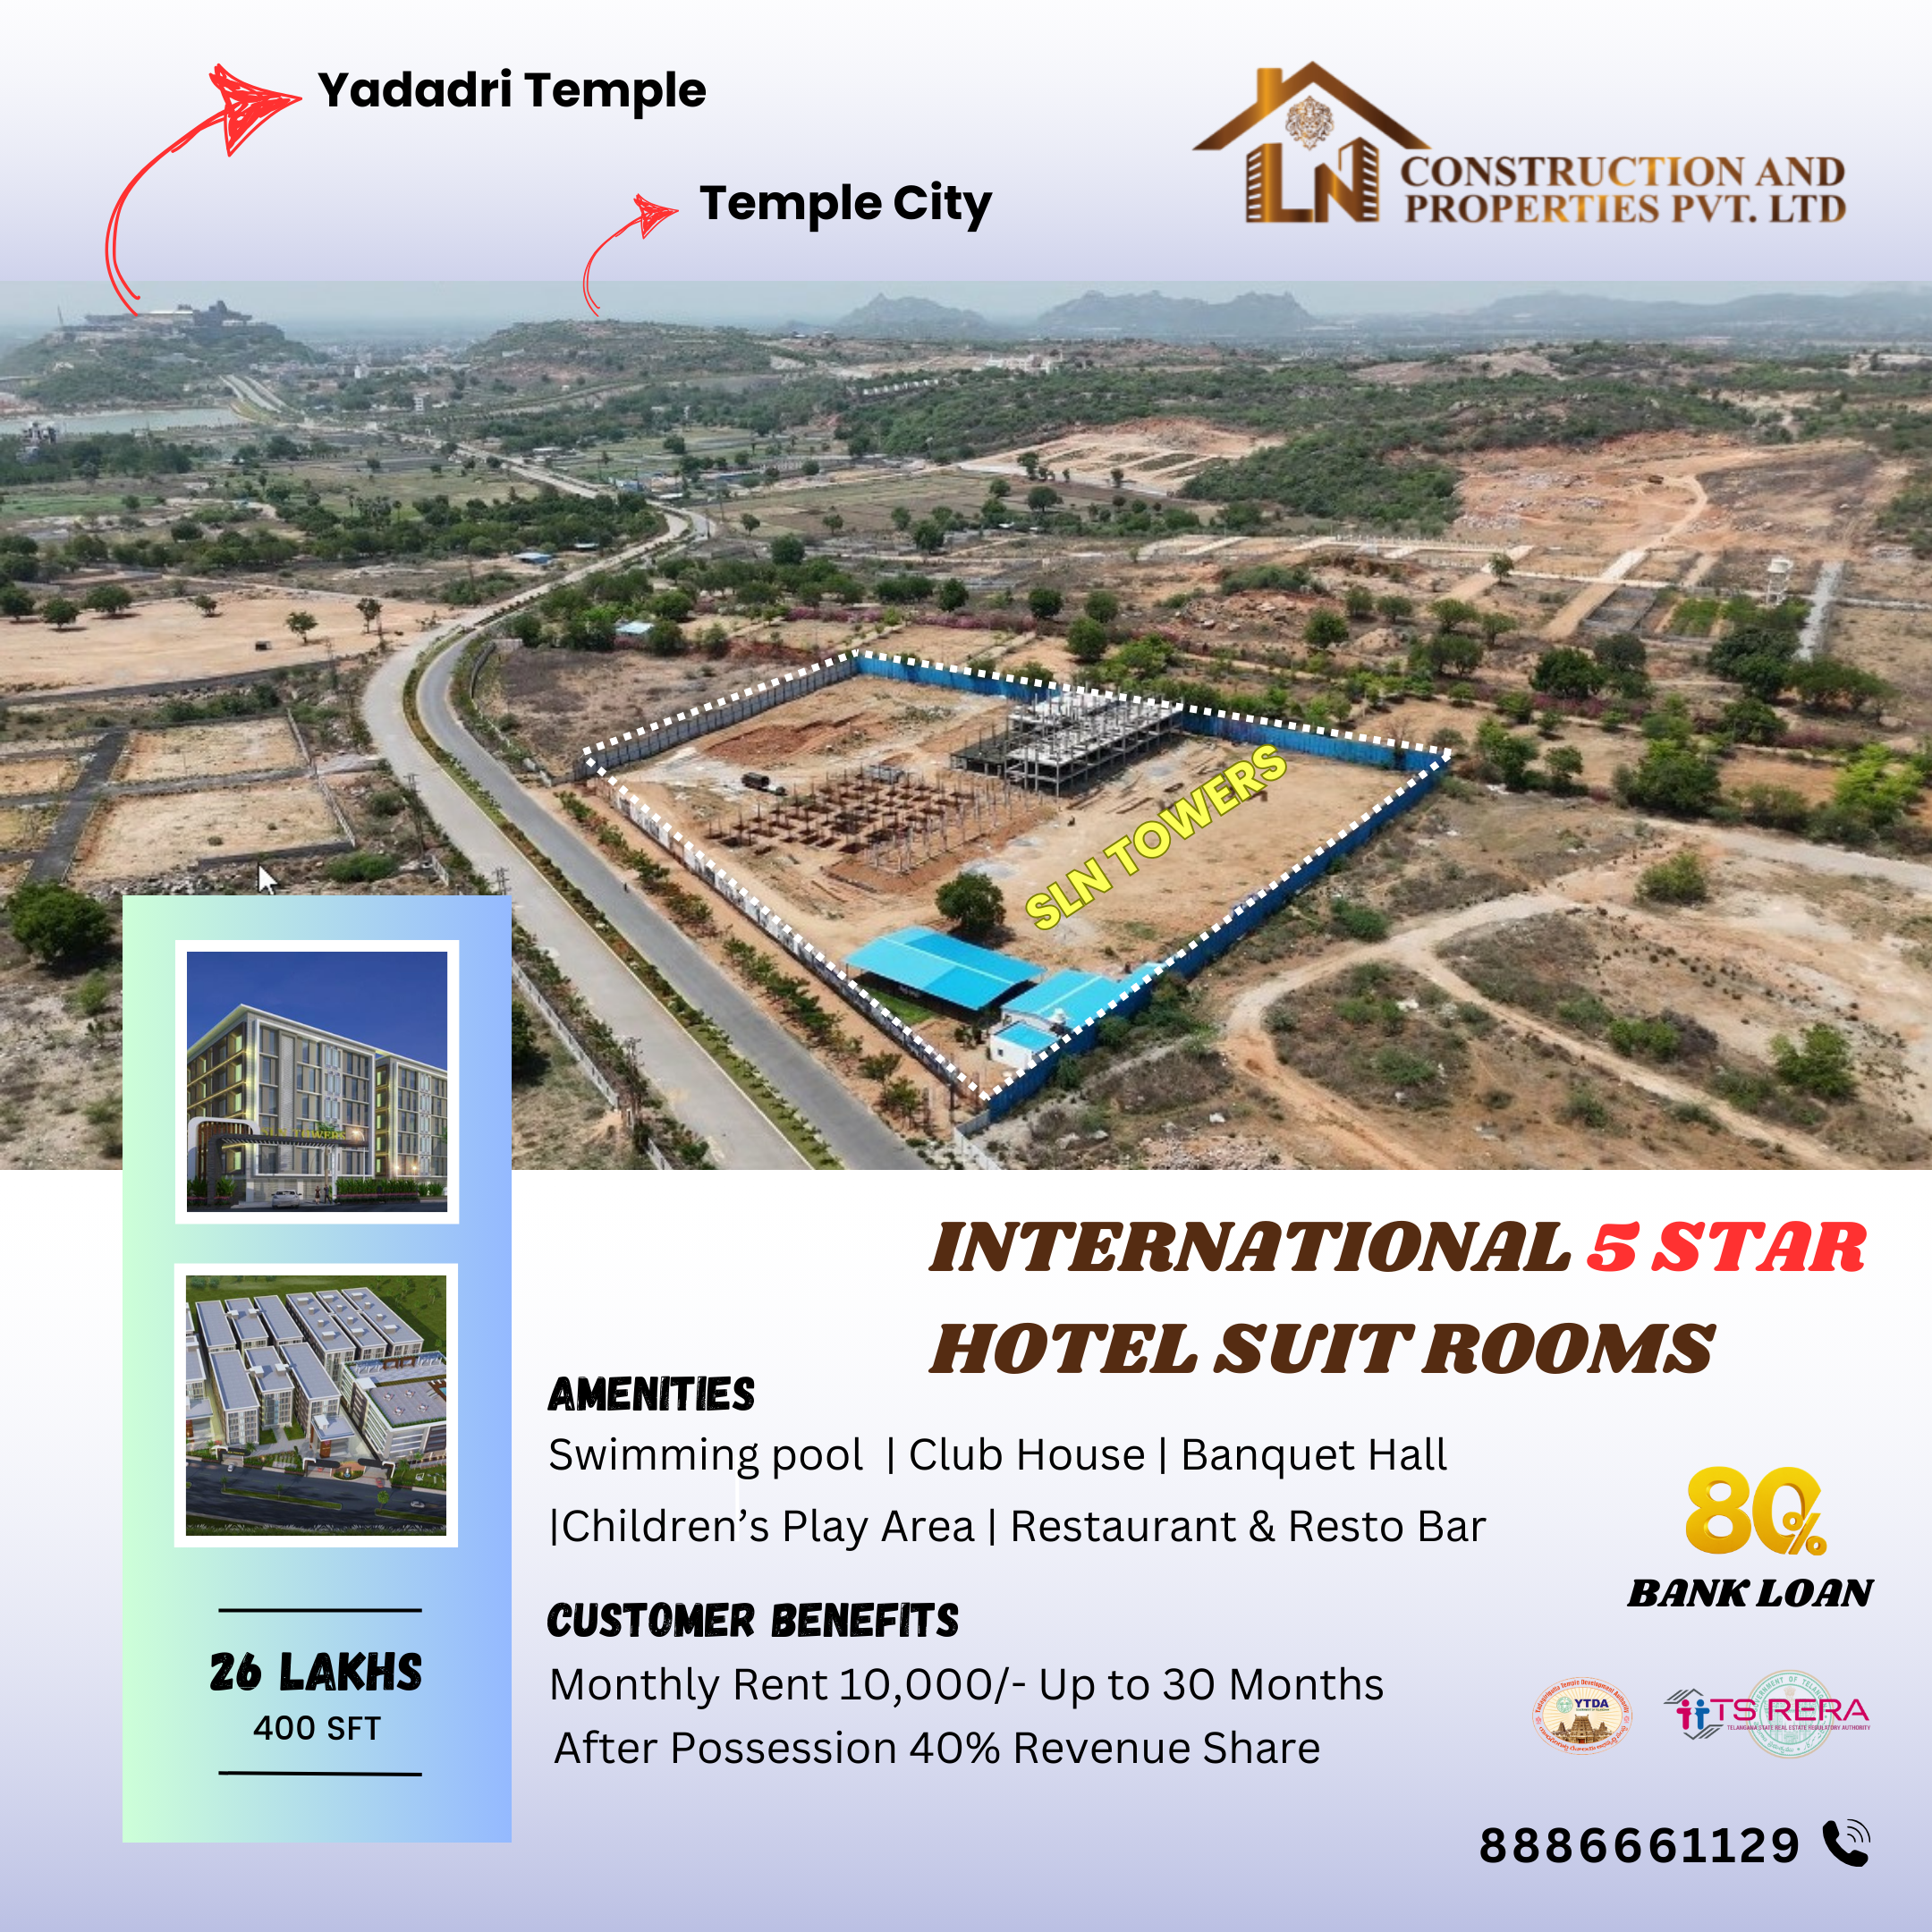 Invest in International 5-Star Hotel Suite Rooms with CONSTRUCTION AND PROPERTIES PVT. LTD - Your Path to Prosperity Starts Here!